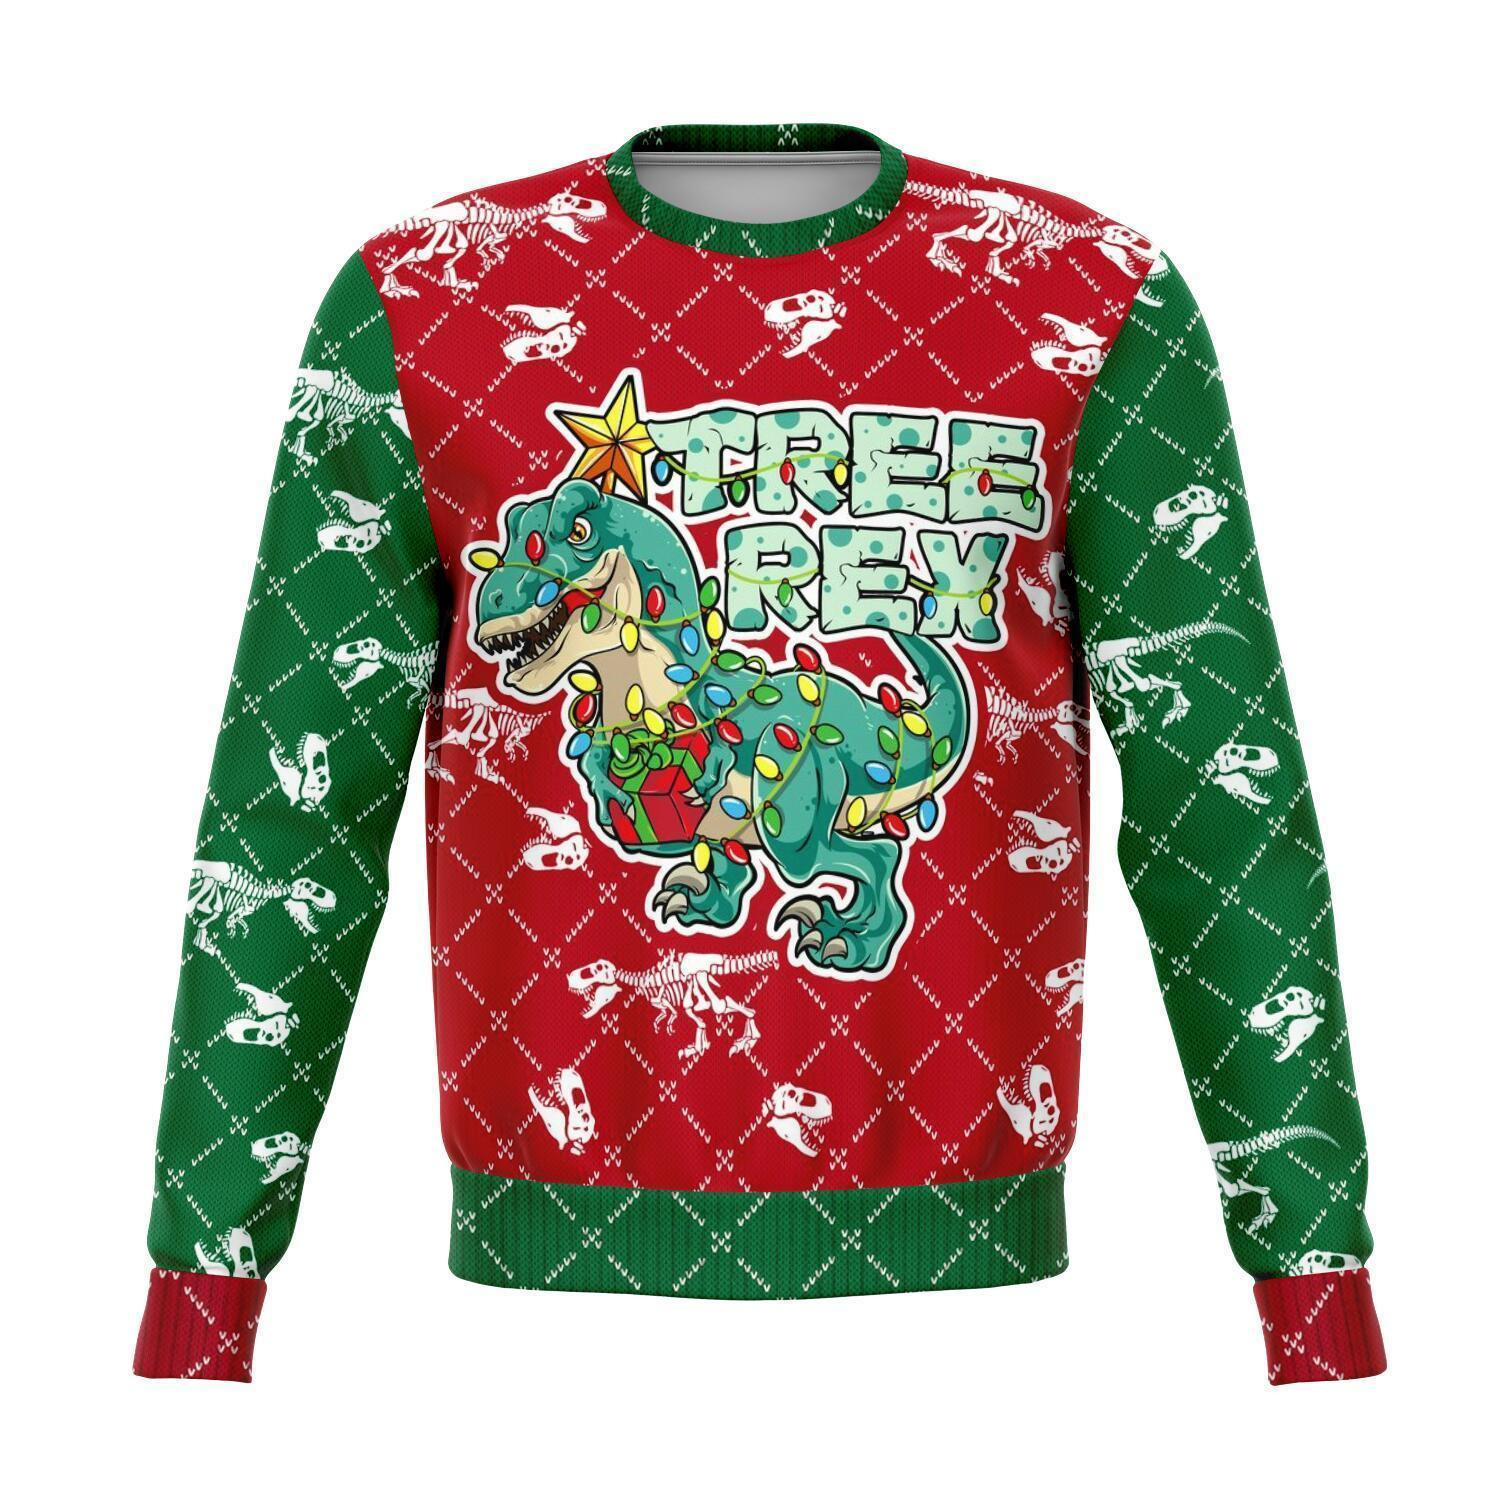 Dinosaur T-rex Ugly Christmas Sweater Ugly Sweater For Men Women